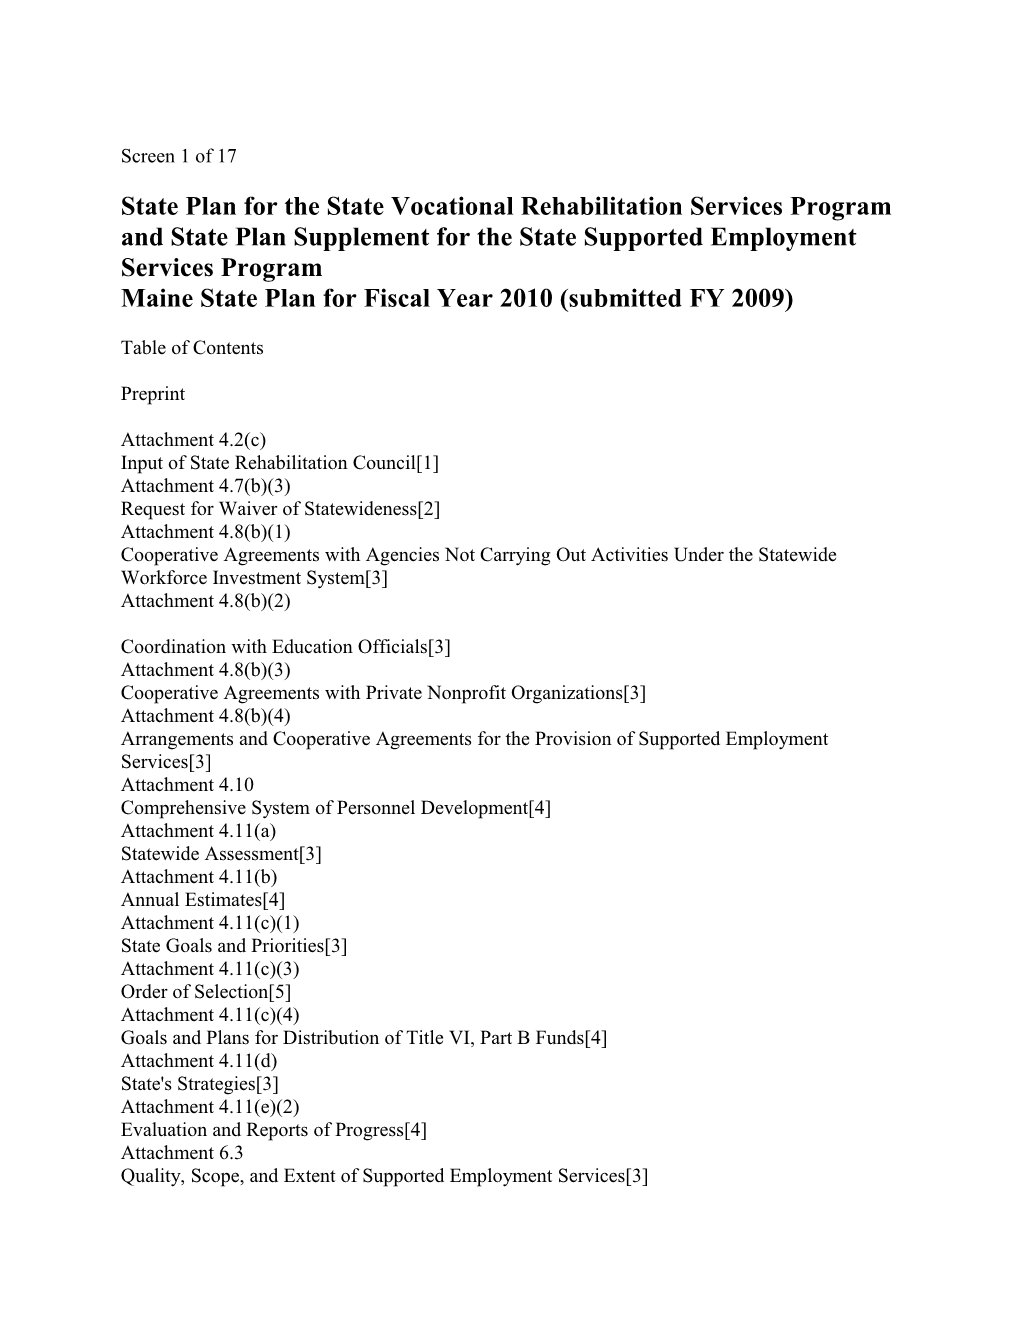 Maine State Plan for Fiscal Year 2010 (Submitted FY 2009)